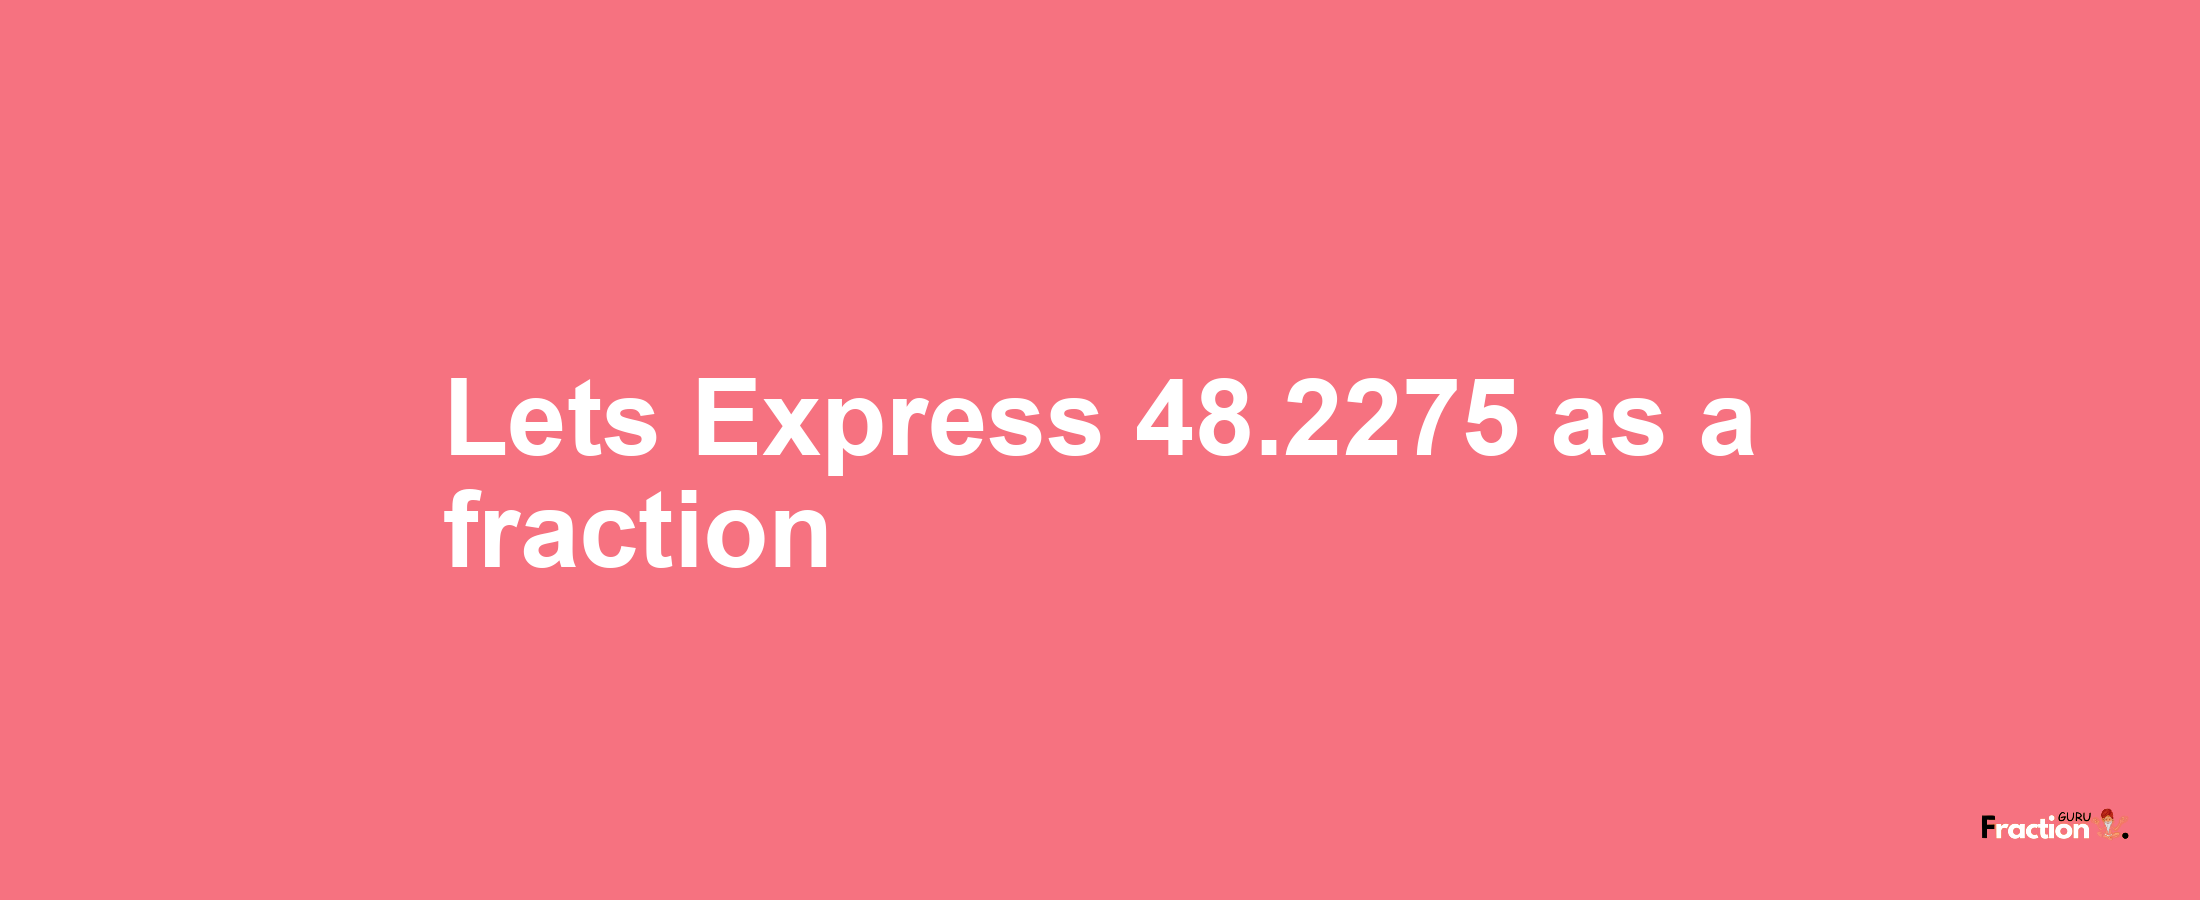 Lets Express 48.2275 as afraction